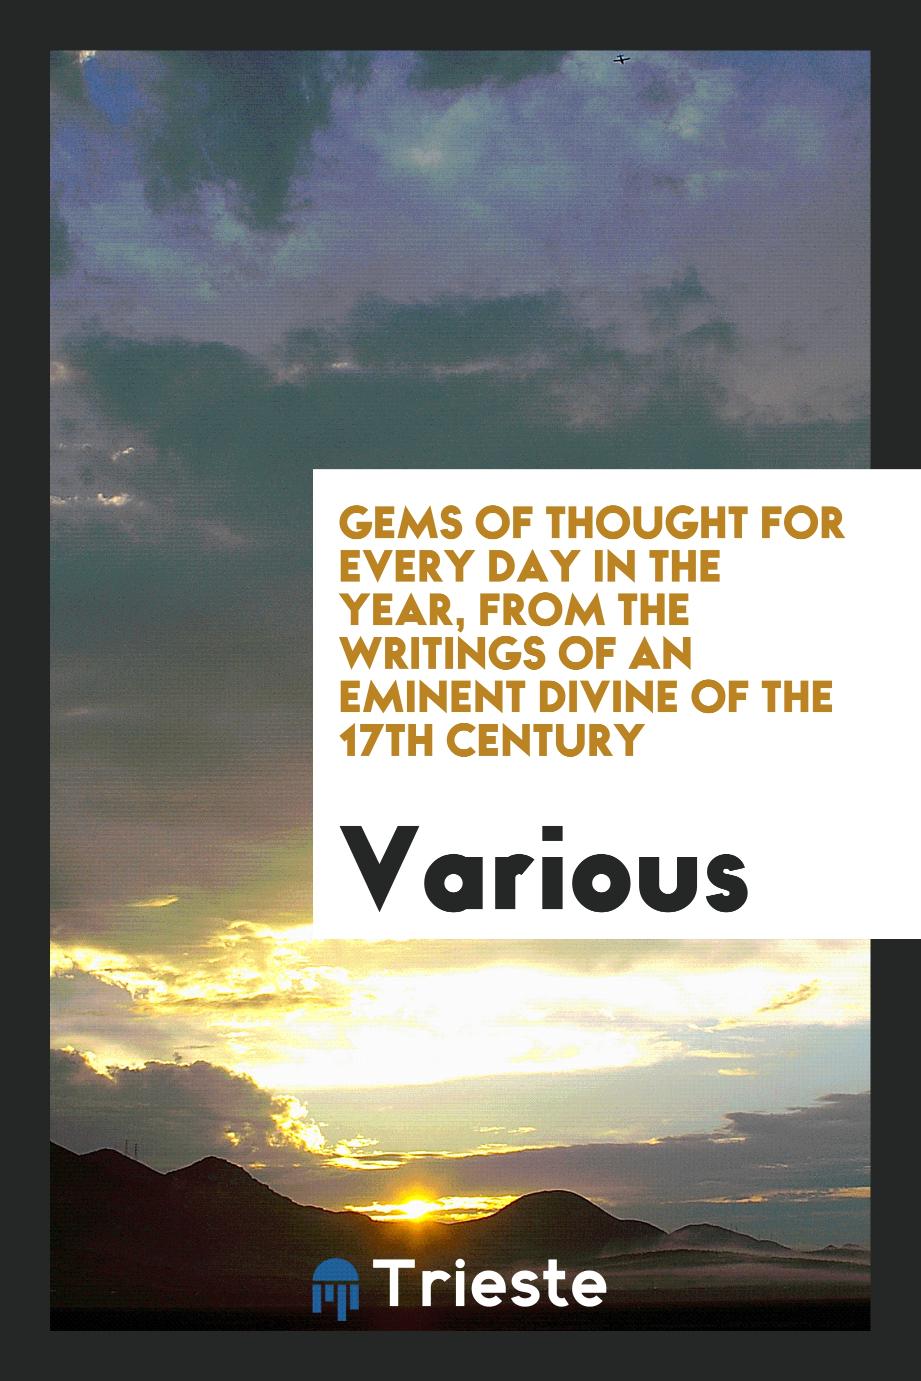 Gems of Thought for Every Day in the Year, from the Writings of an Eminent Divine of the 17th Century